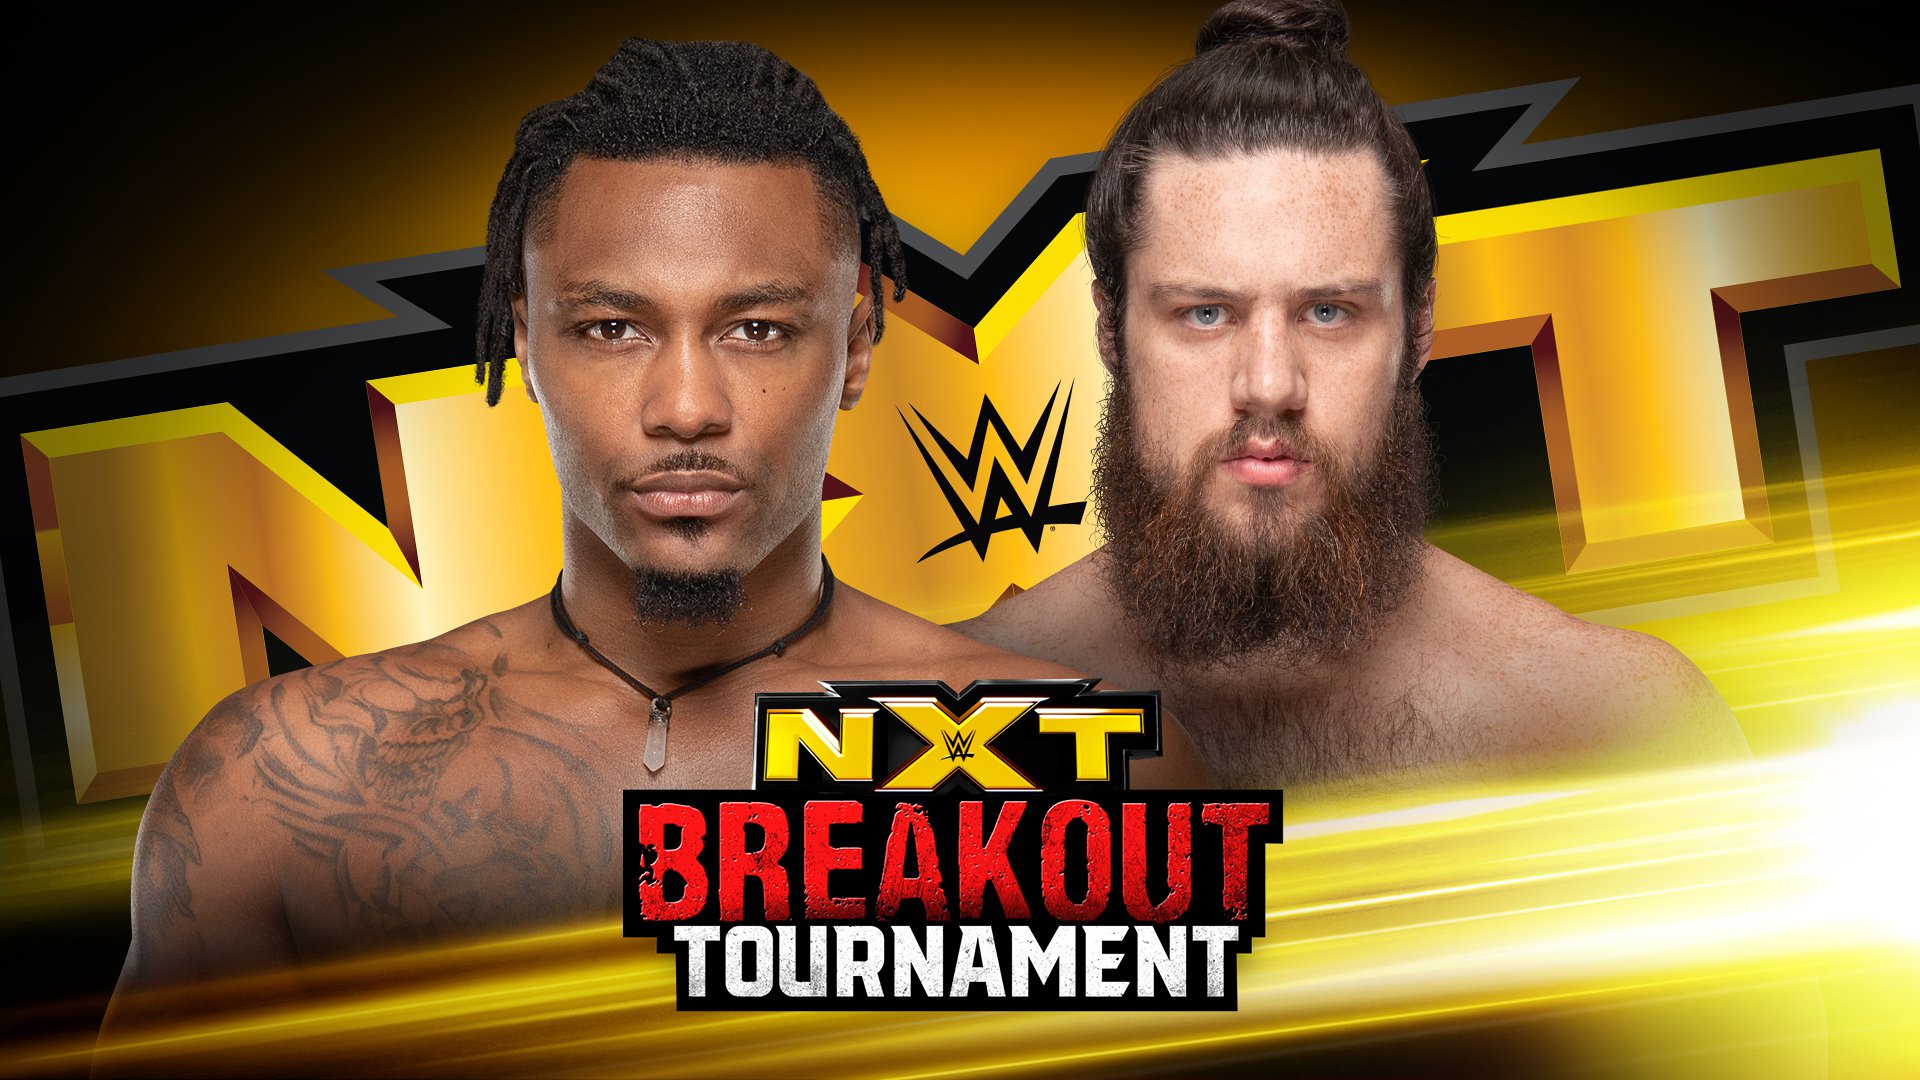 The NXT Breakout Tournament rolls on